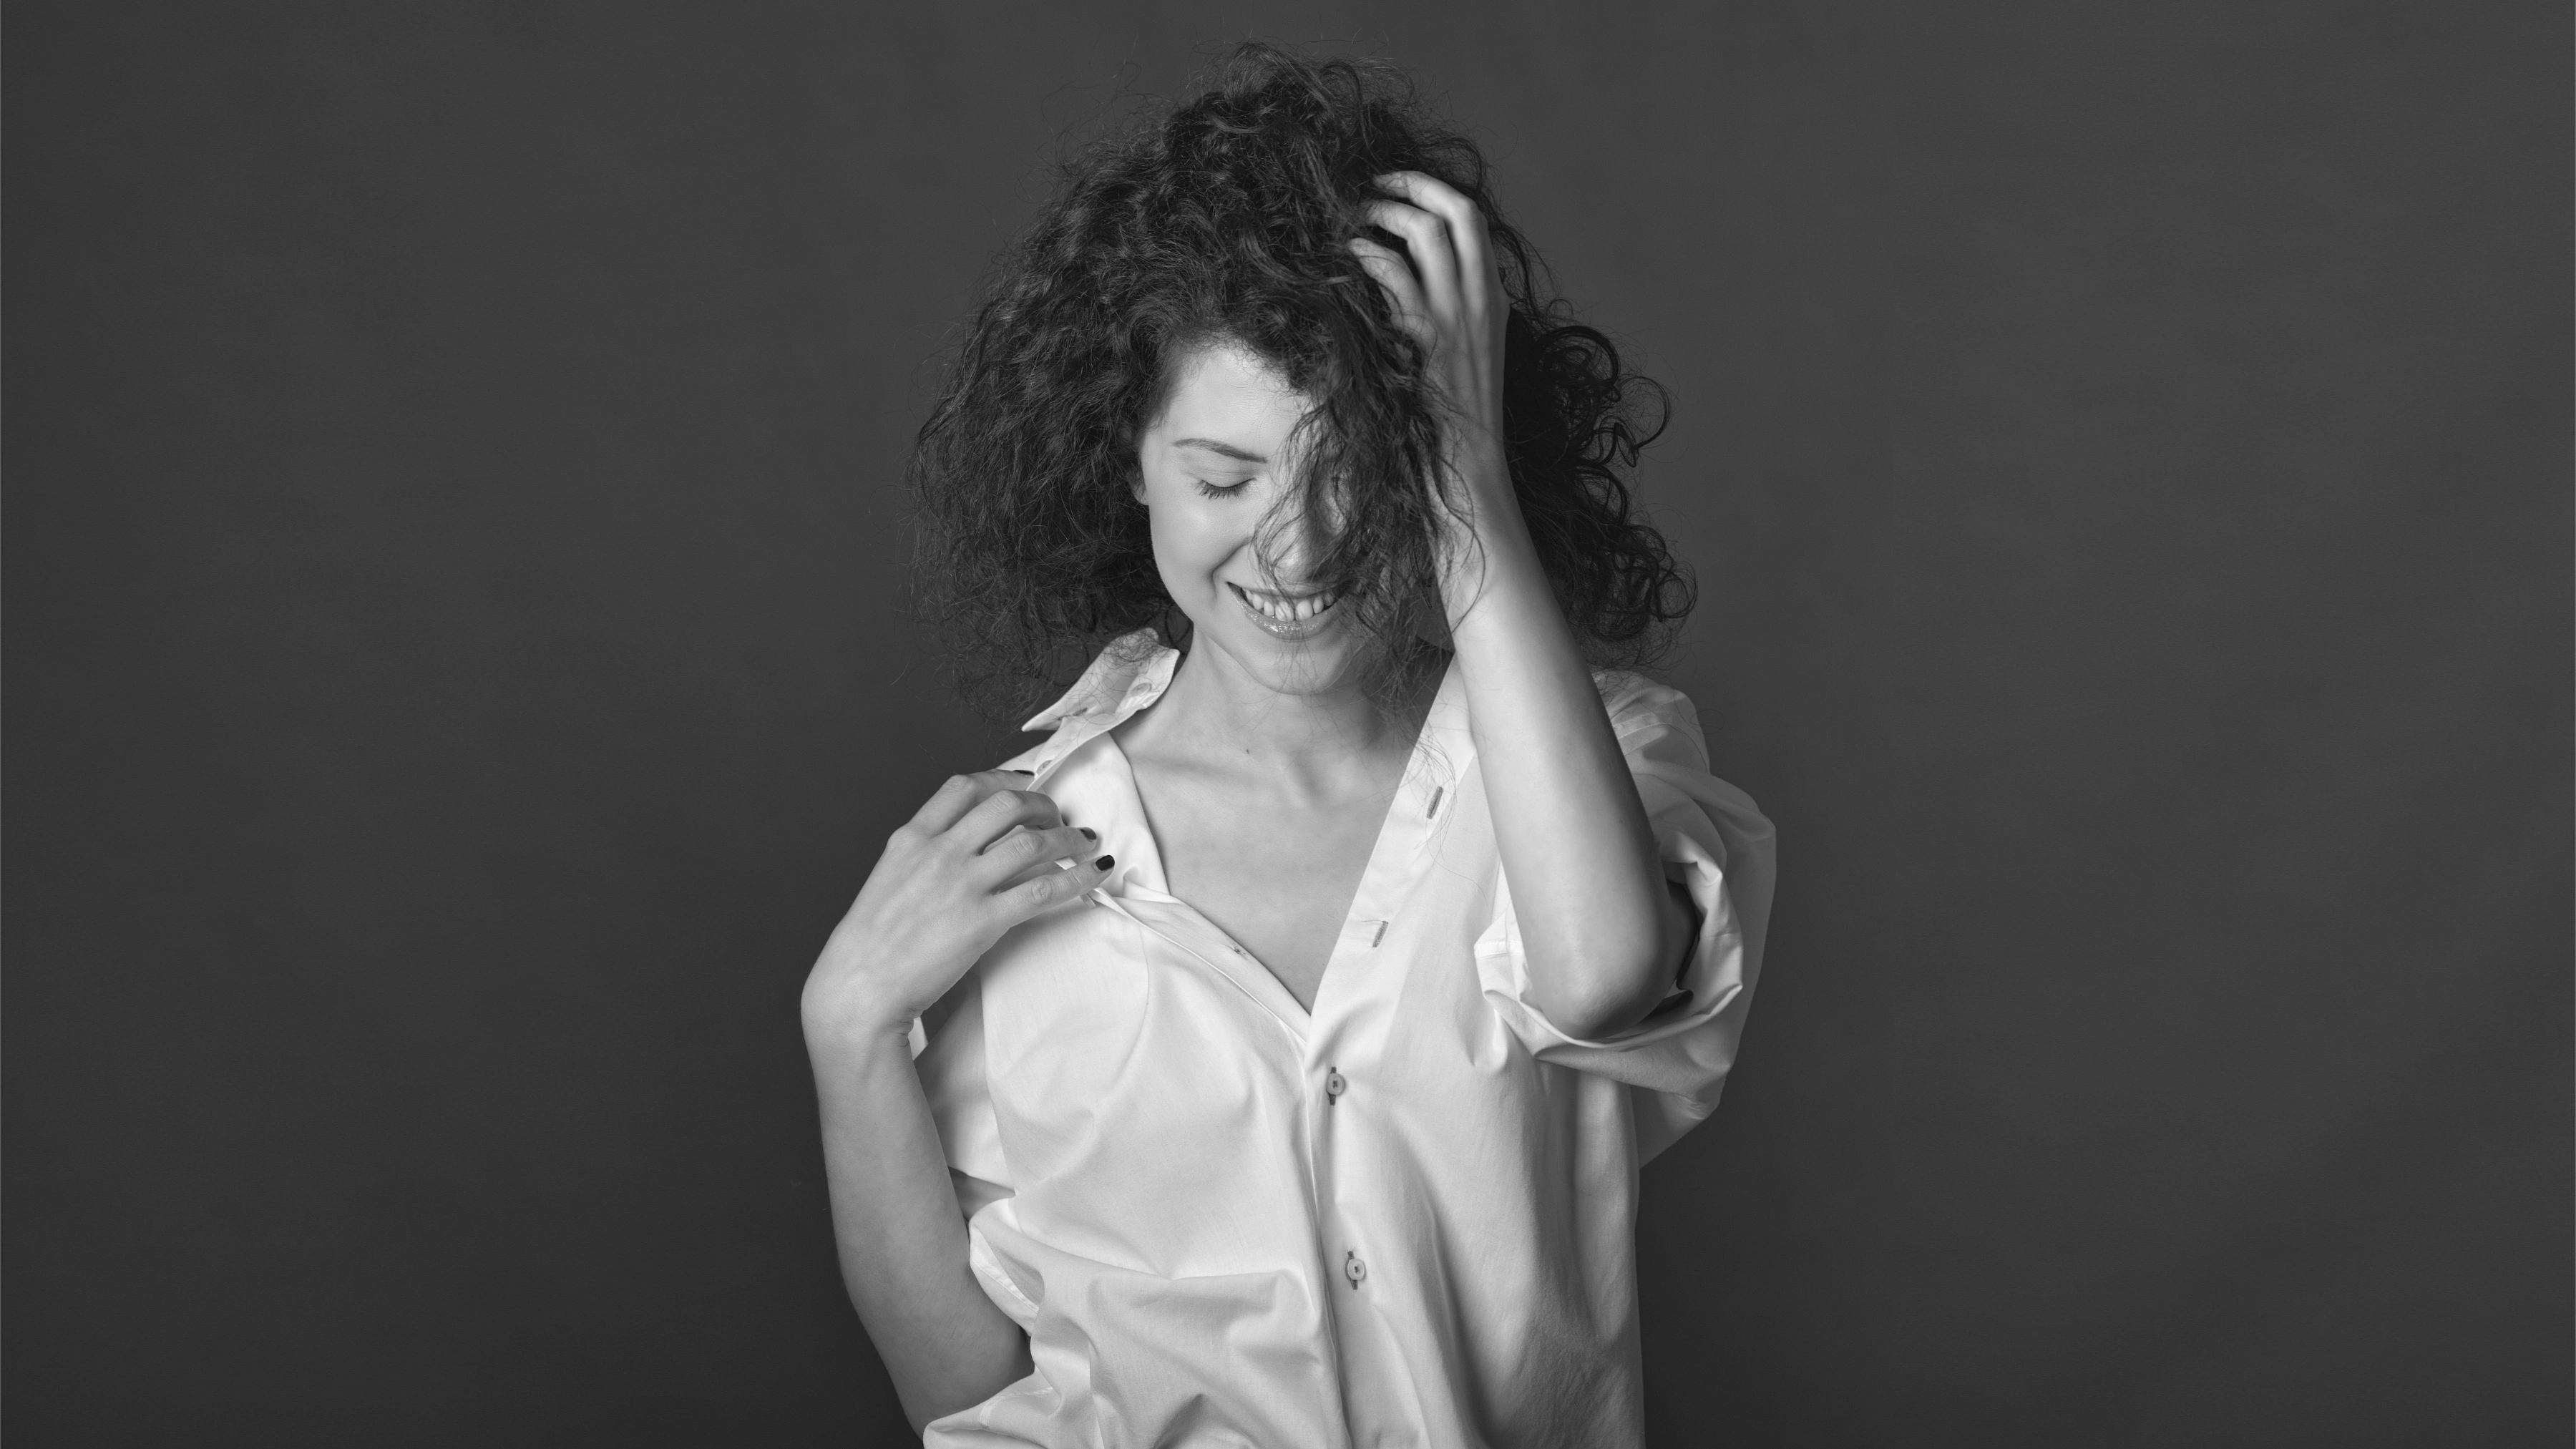 Black and white portrait of a smiling model on a dark grey background wearing a white shirt